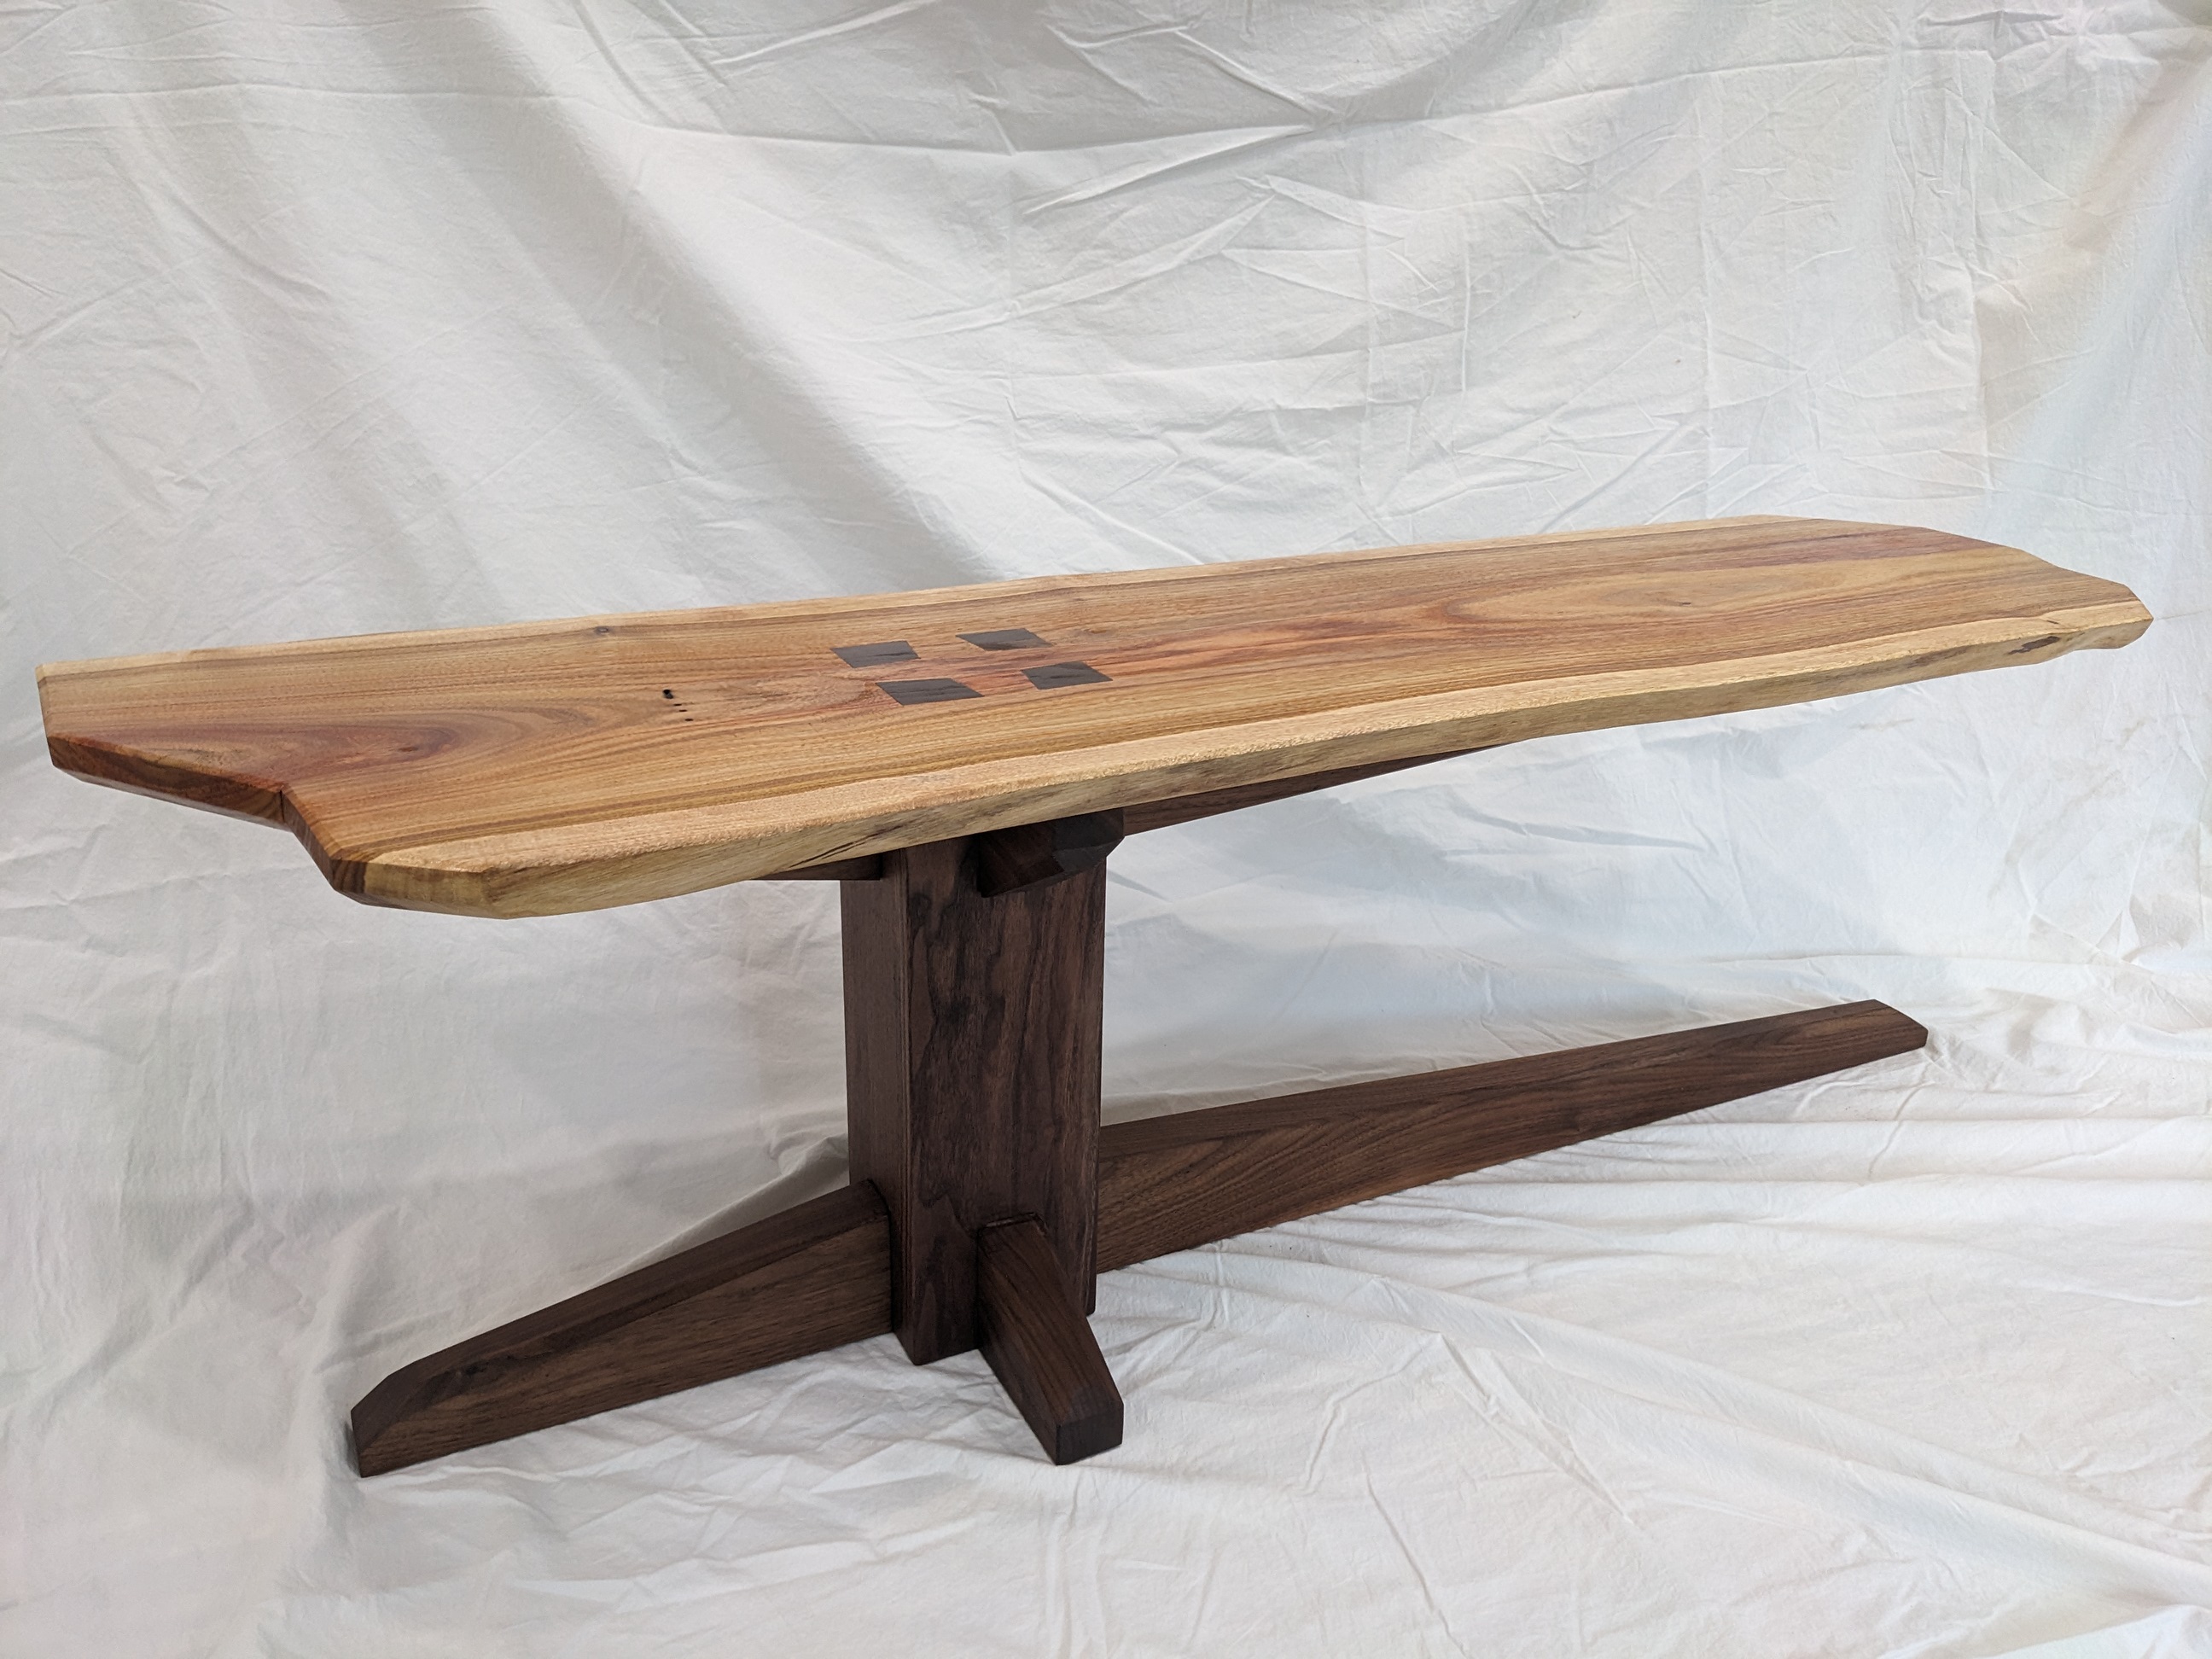 A Japanese-inspired Cantilever Bench